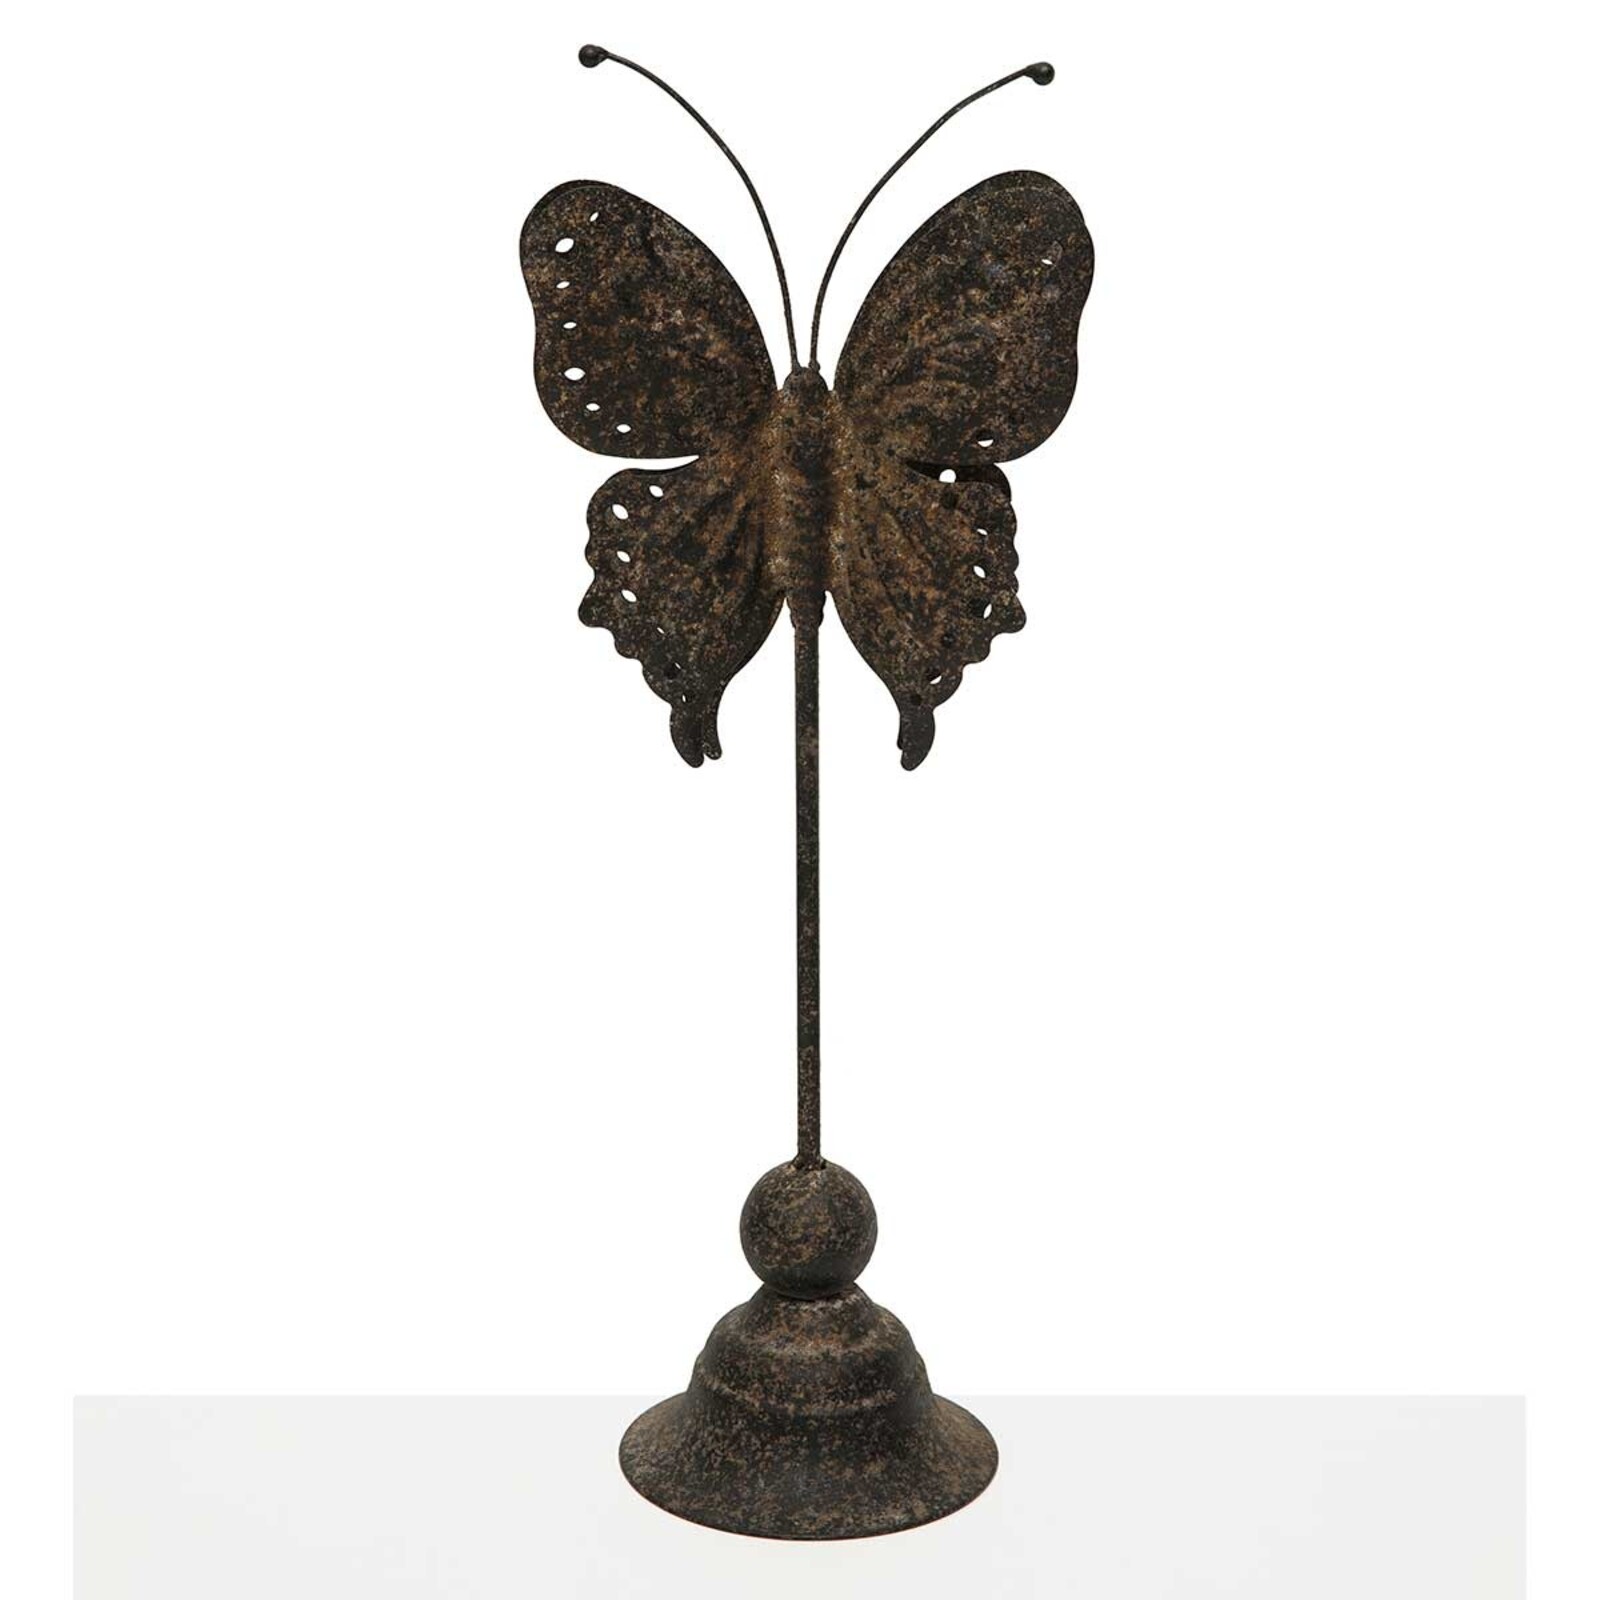 Meravic BUTTERFLY ON STAND  AGED BRONZE METAL   A3632 loading=